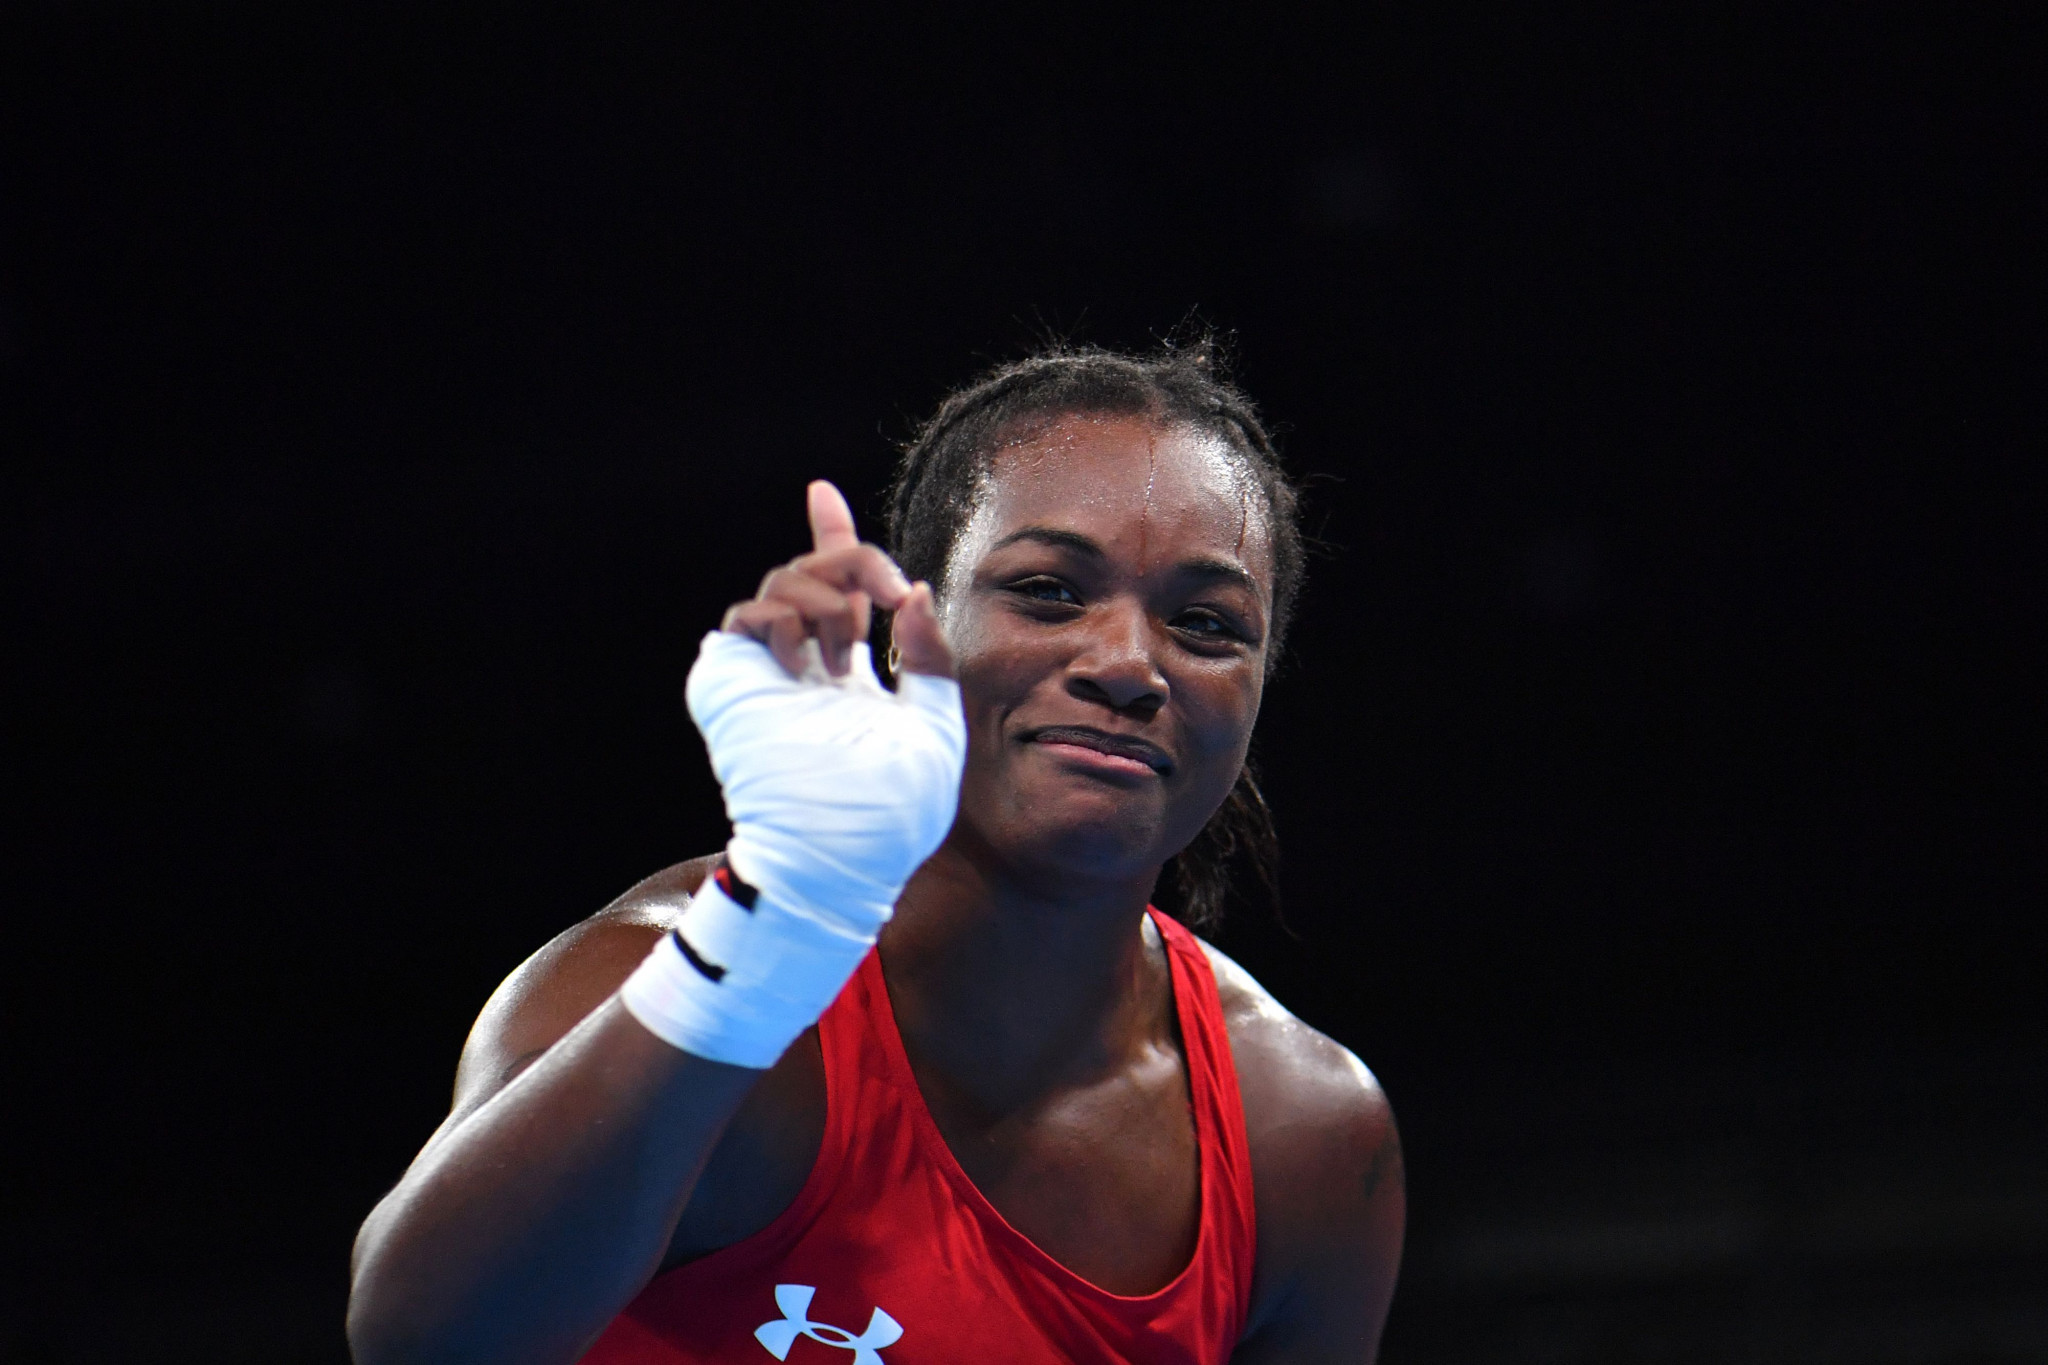 Claressa Shields overcame Yaroslav Yakushina in the quarter-finals at Rio 2016 ©Getty Images